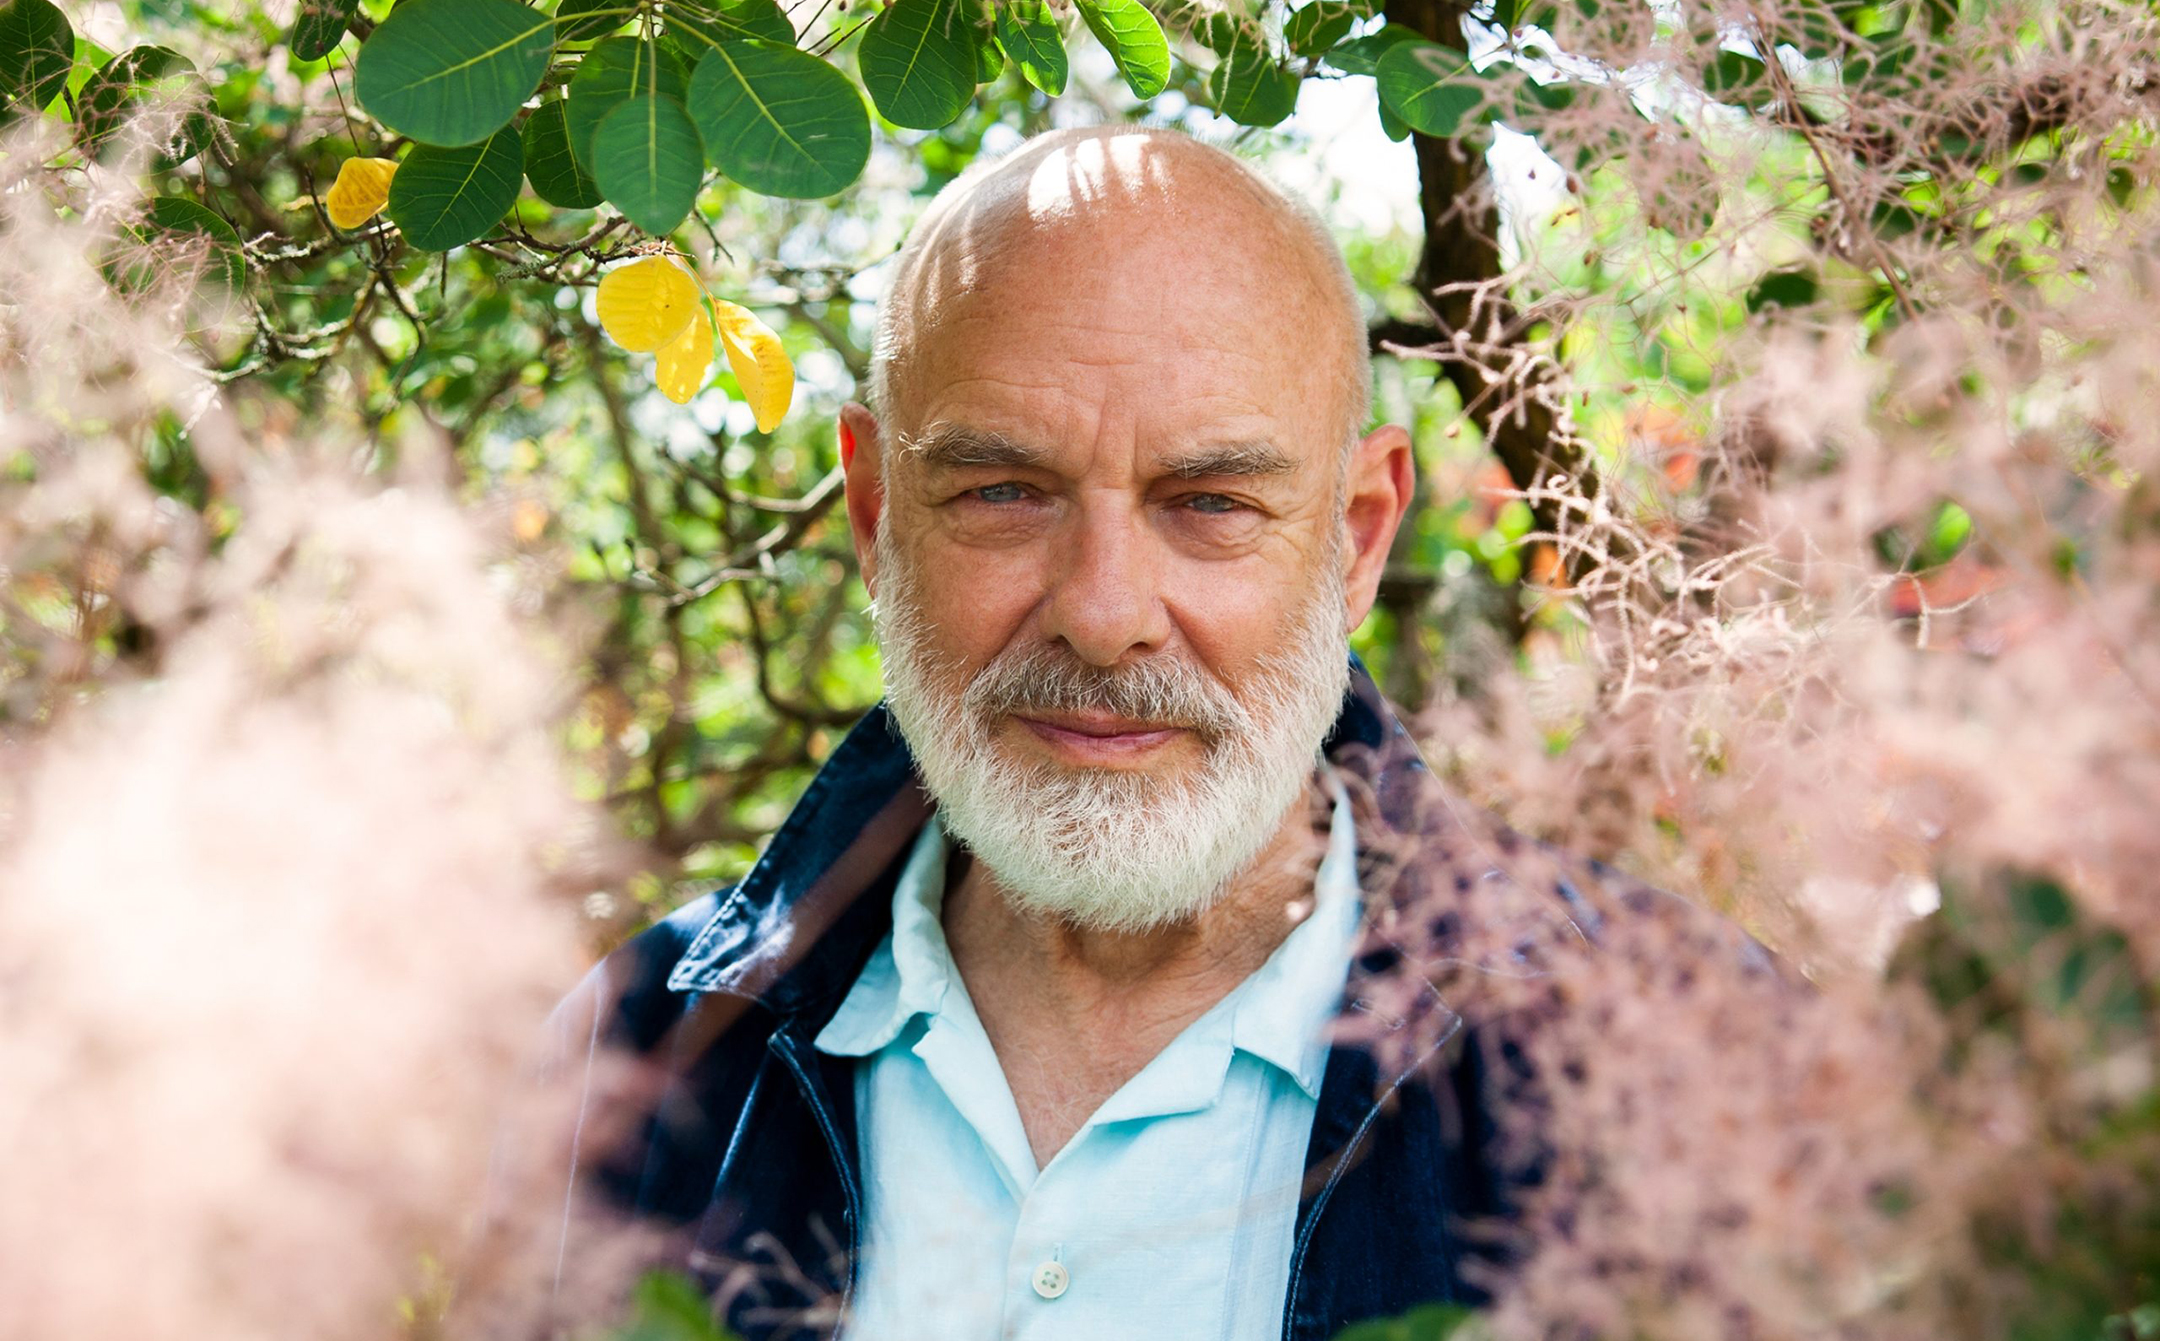 Balding man with a gray beard standing in a thicket of trees and flora